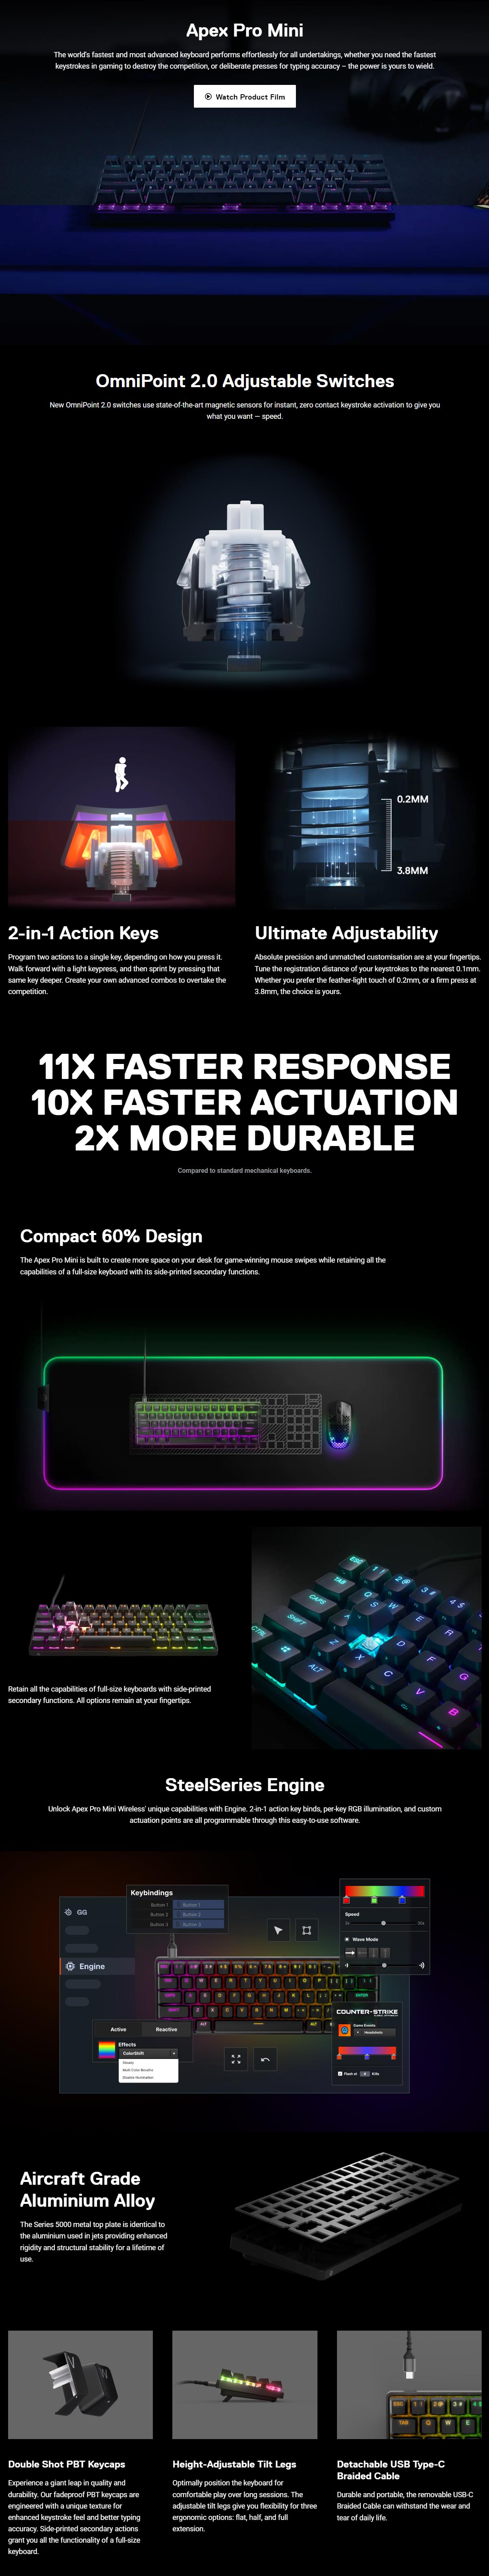 A large marketing image providing additional information about the product SteelSeries Apex Pro Mini - Gaming Keyboard (OptiPoint Switch) - Additional alt info not provided